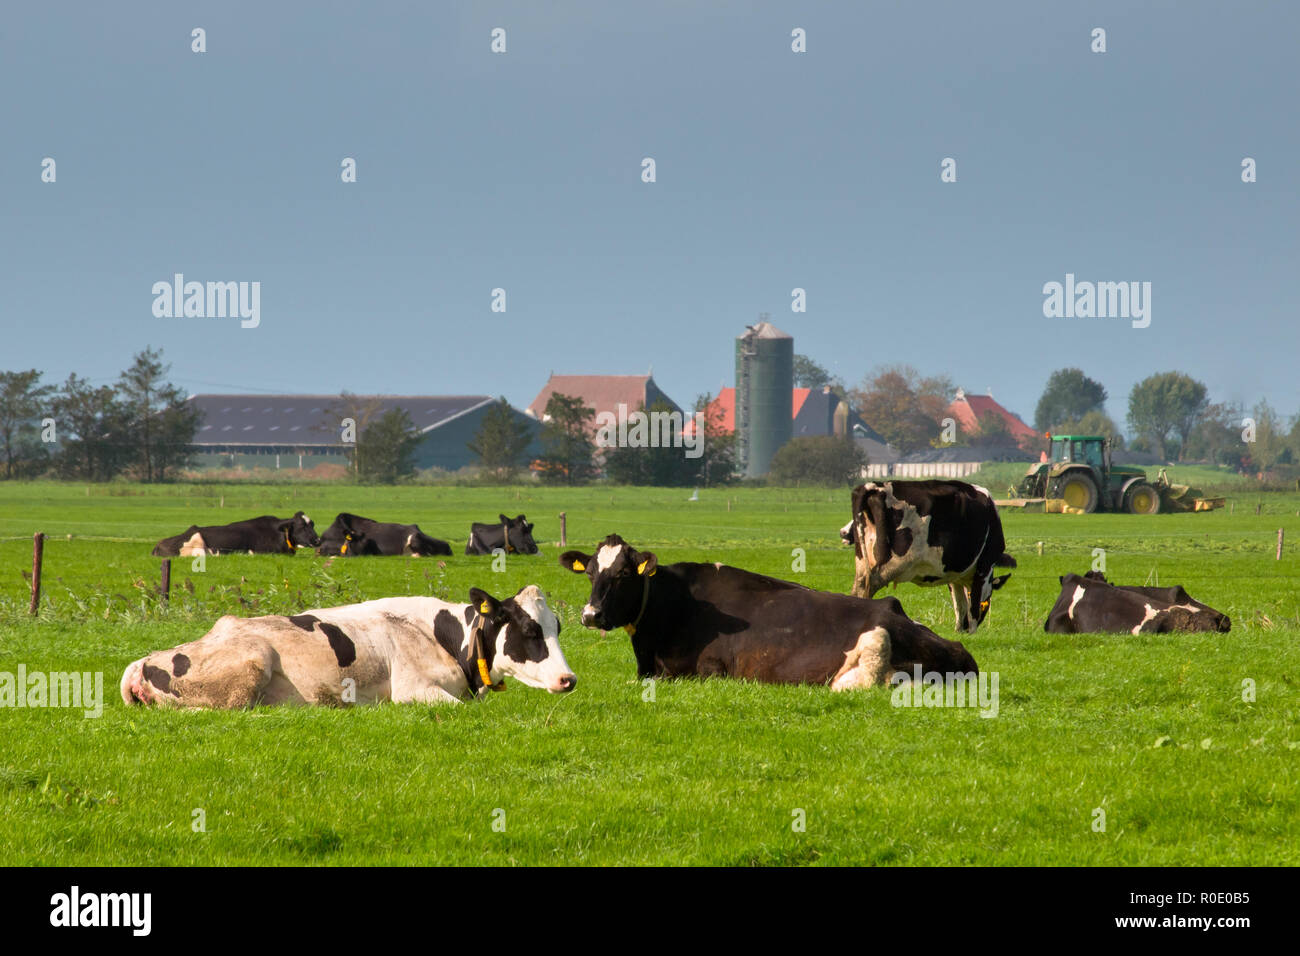 Cows are resting with farm and tractor in backdrop Stock Photo